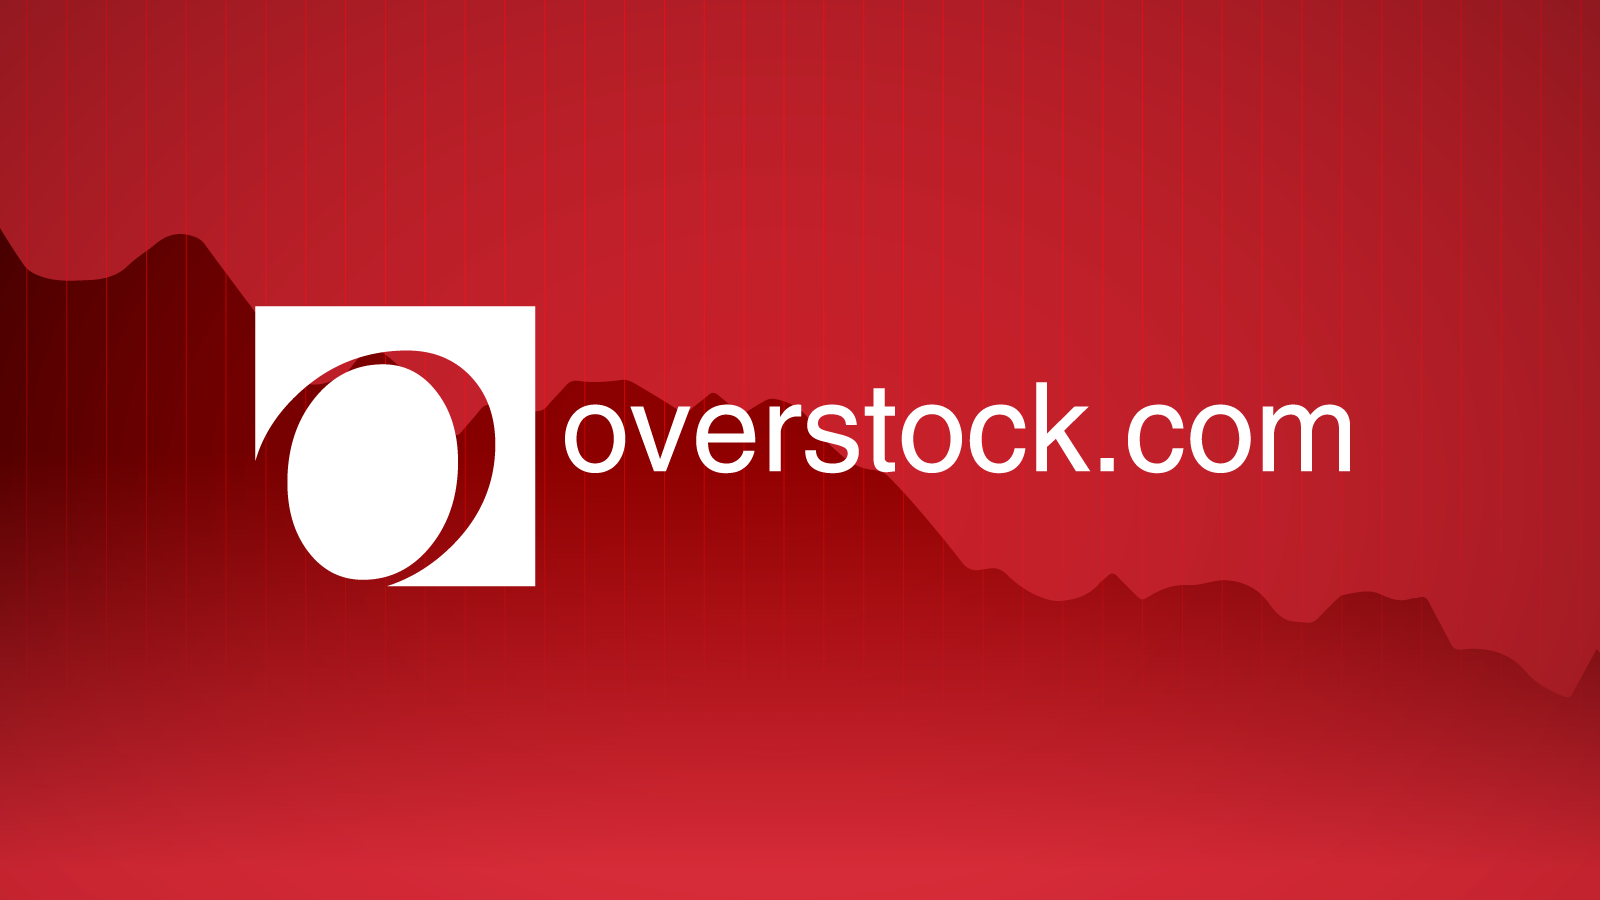 Overstock.com Now Accepts Popular Altcoins For Payment ...